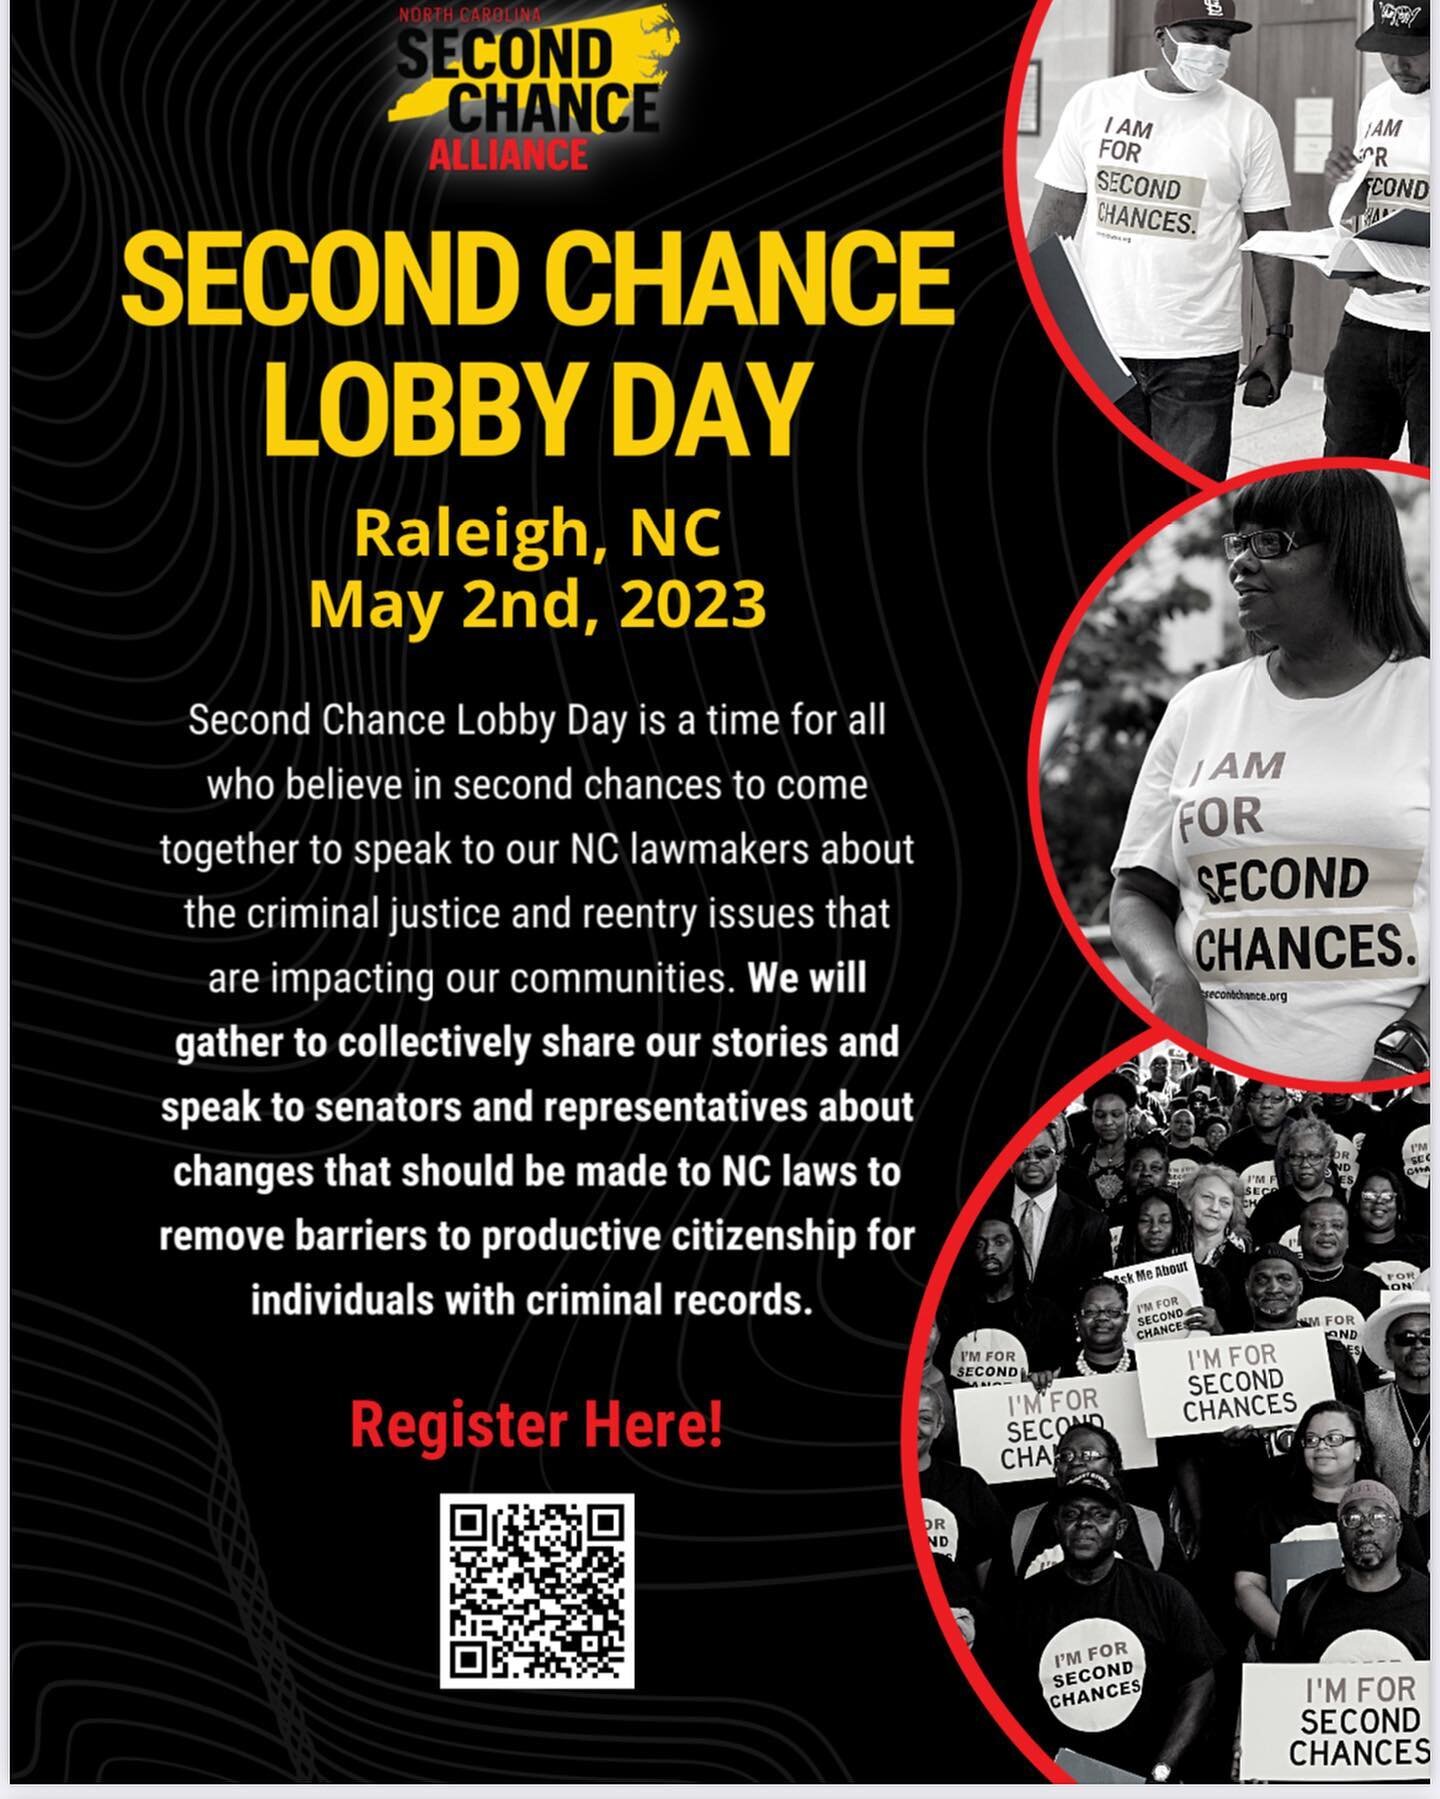 Get on the bus. May 2nd. Second Chance Alliance. #operationgateway